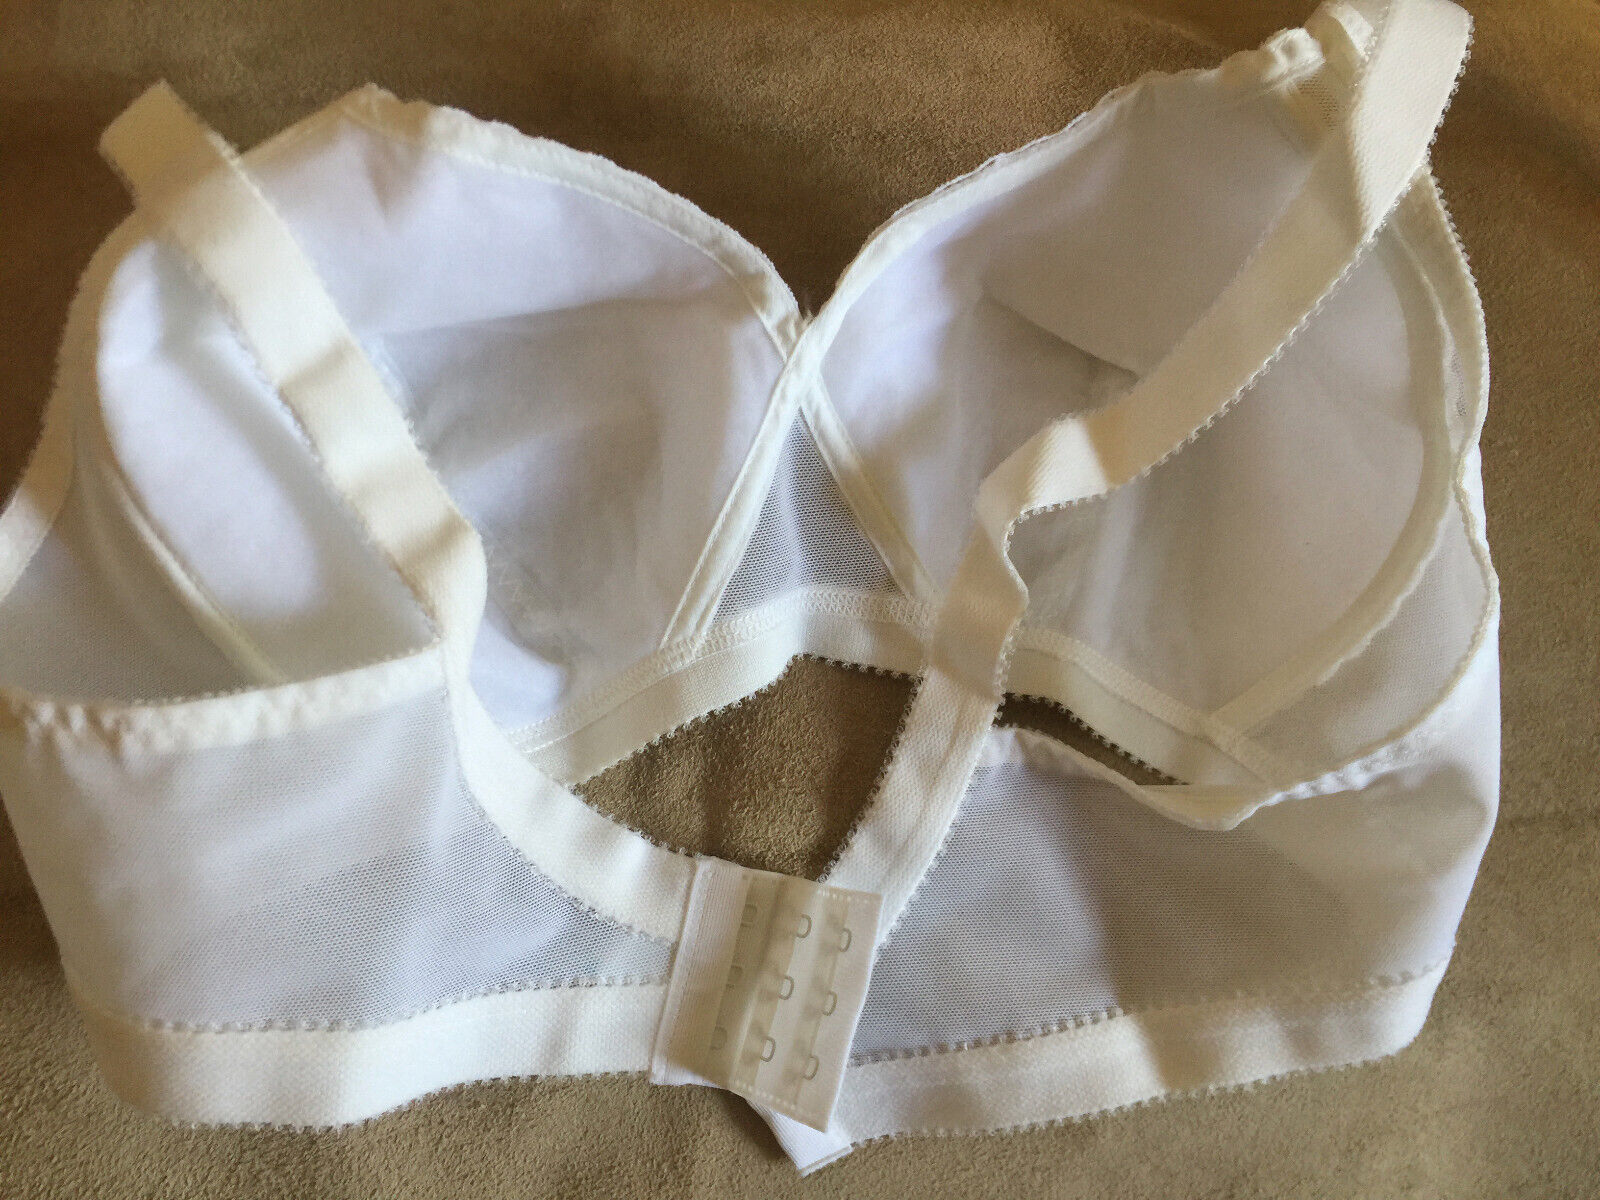 40C CROSS-YOUR-HEART Vintage Playtex Womens and 50 similar items